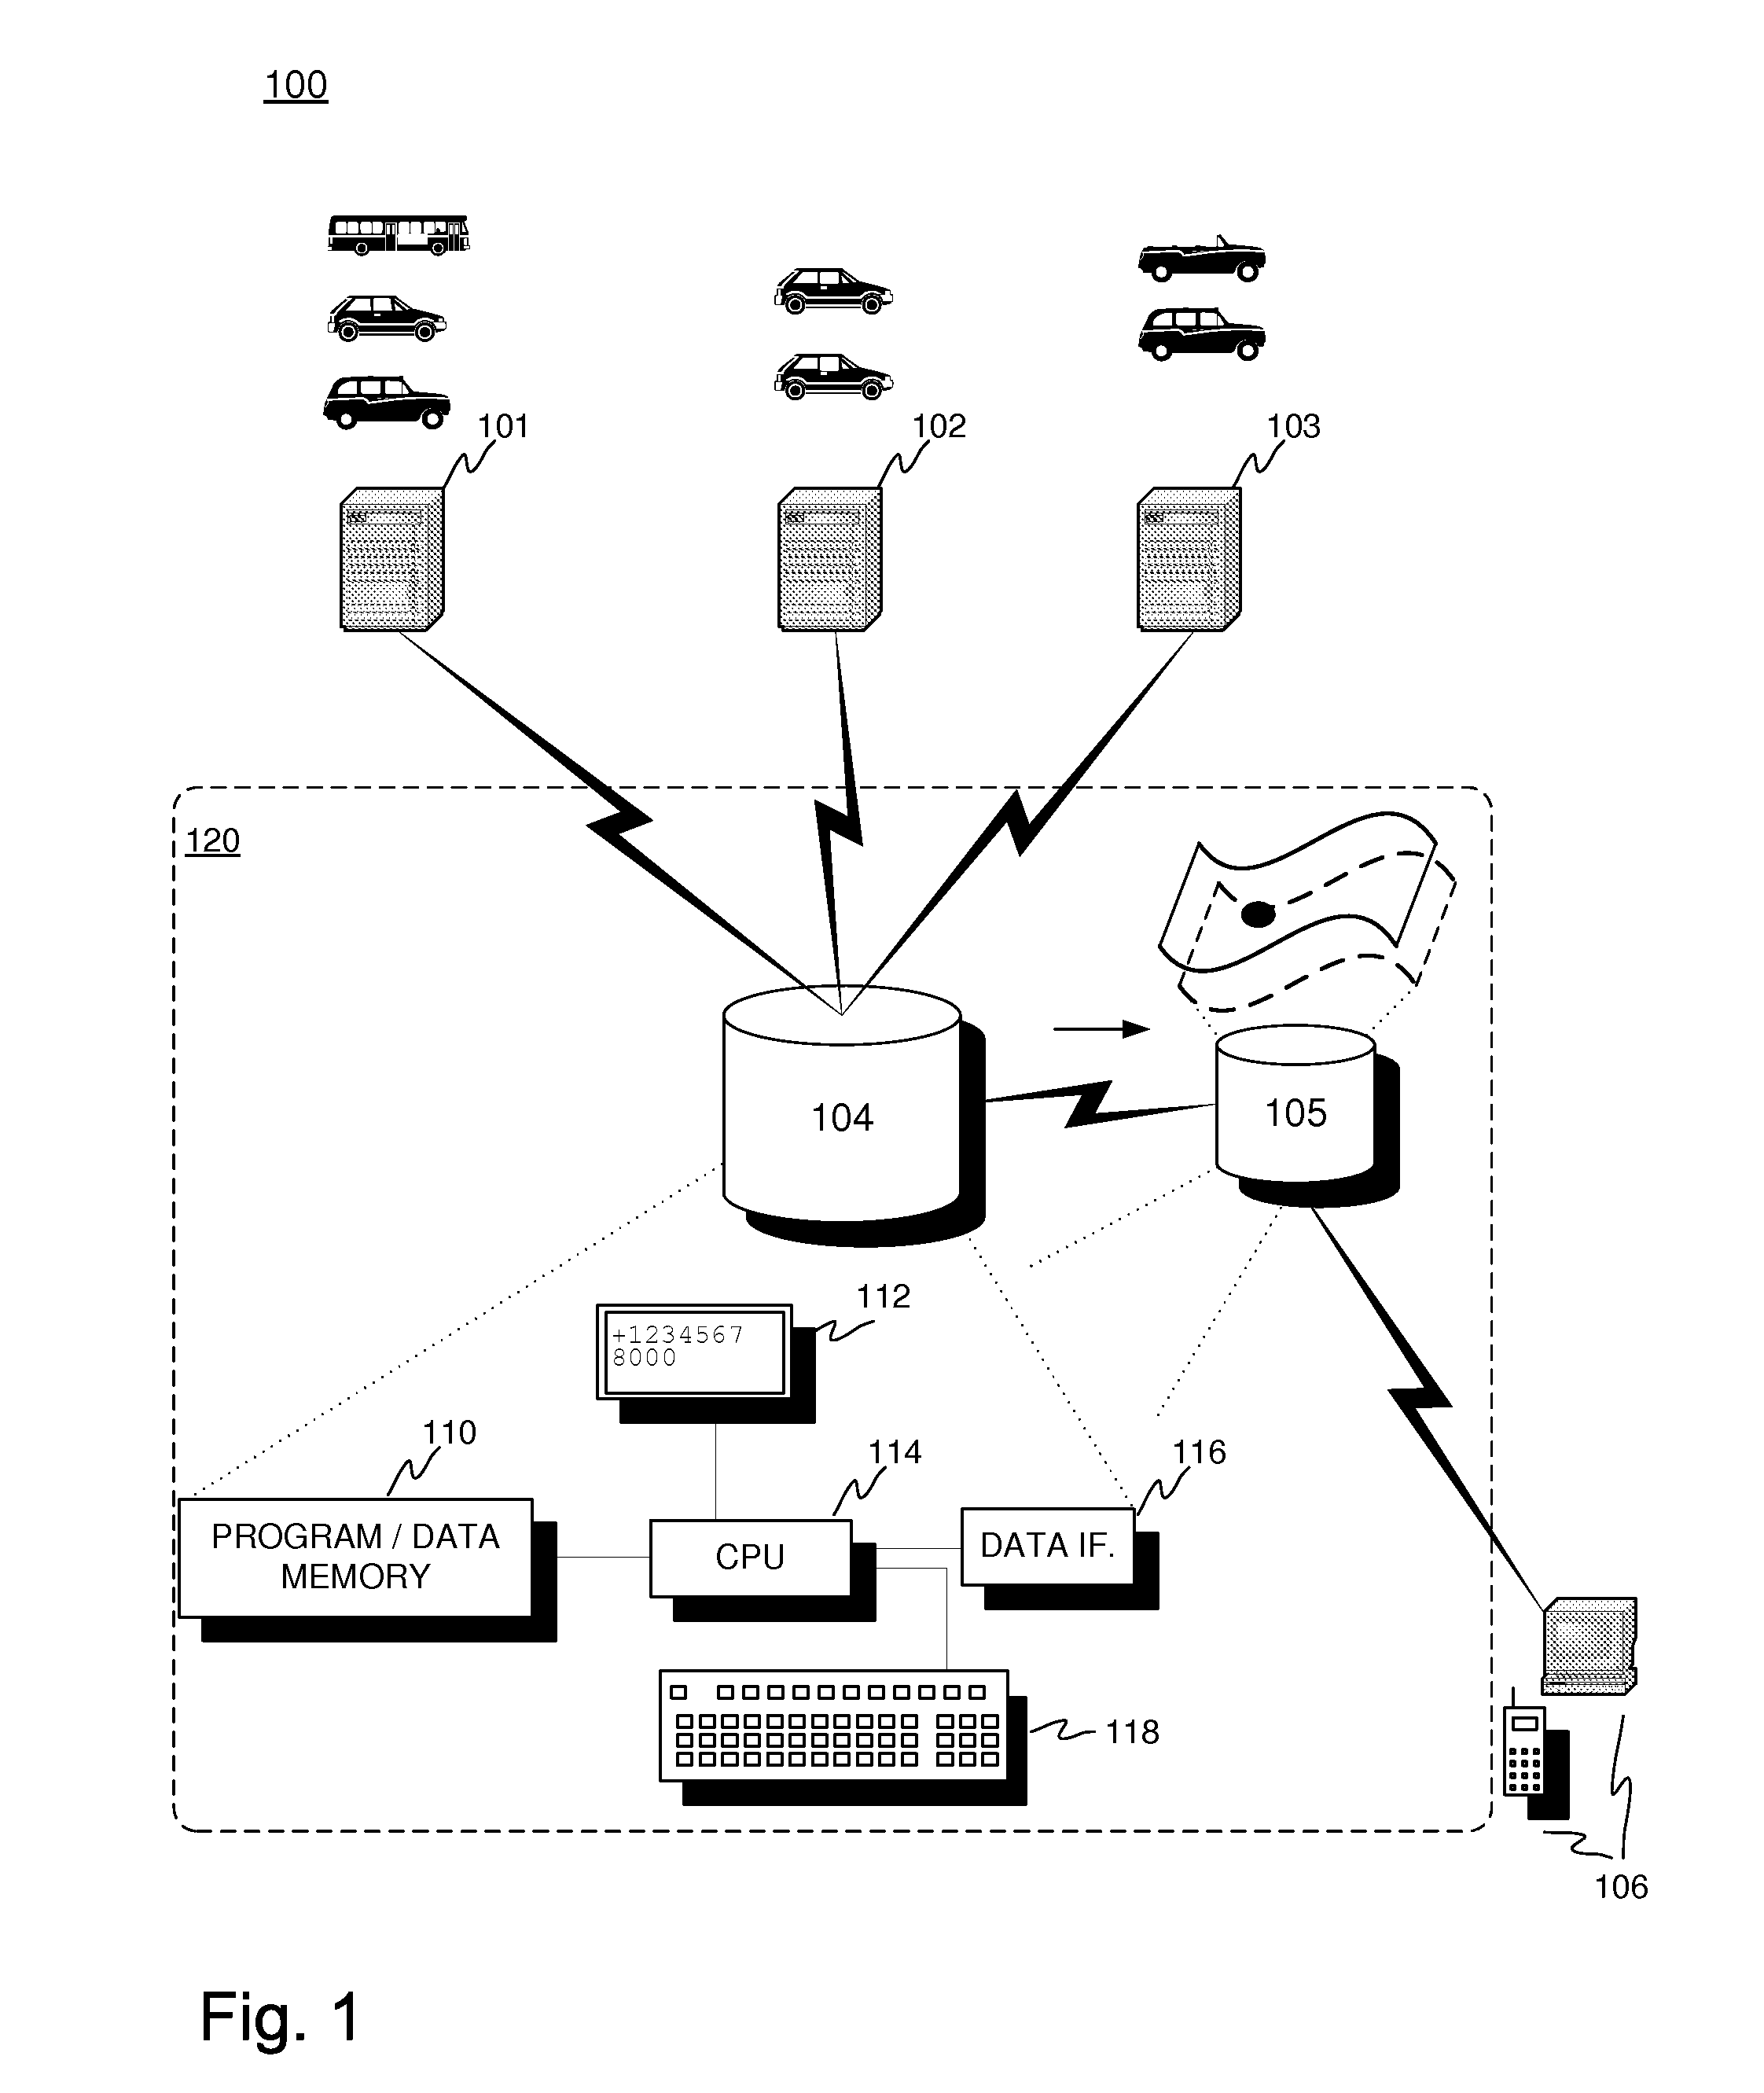 System and method for assessing and managing objects